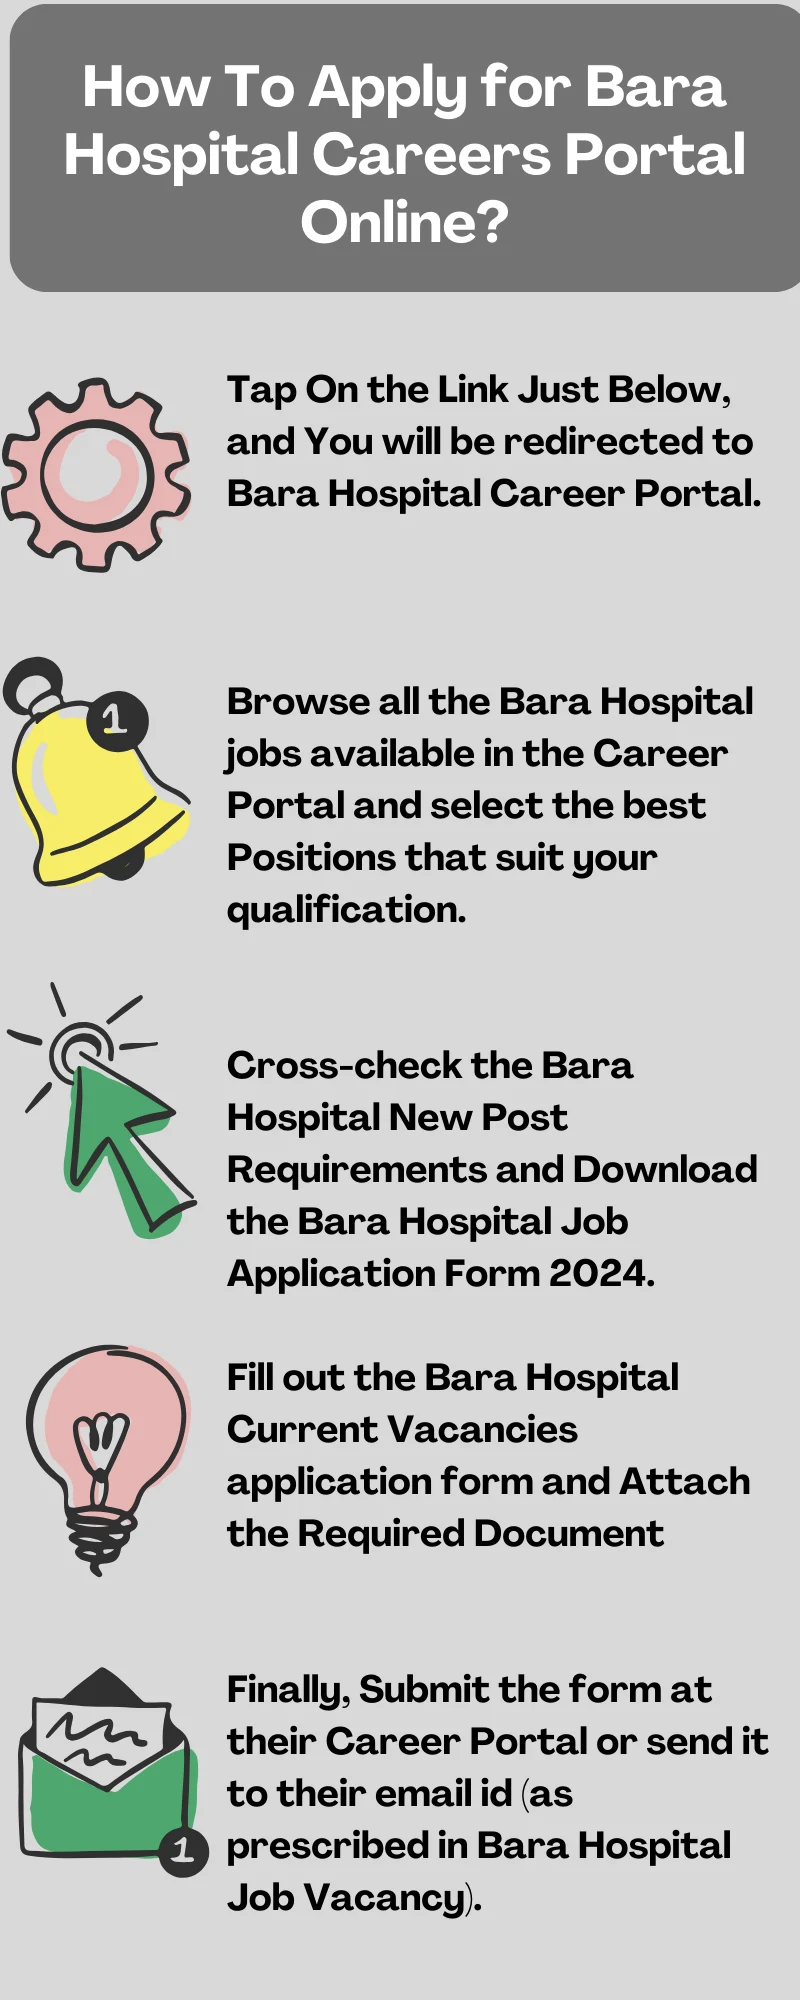 How To Apply for Bara Hospital Careers Portal Online?